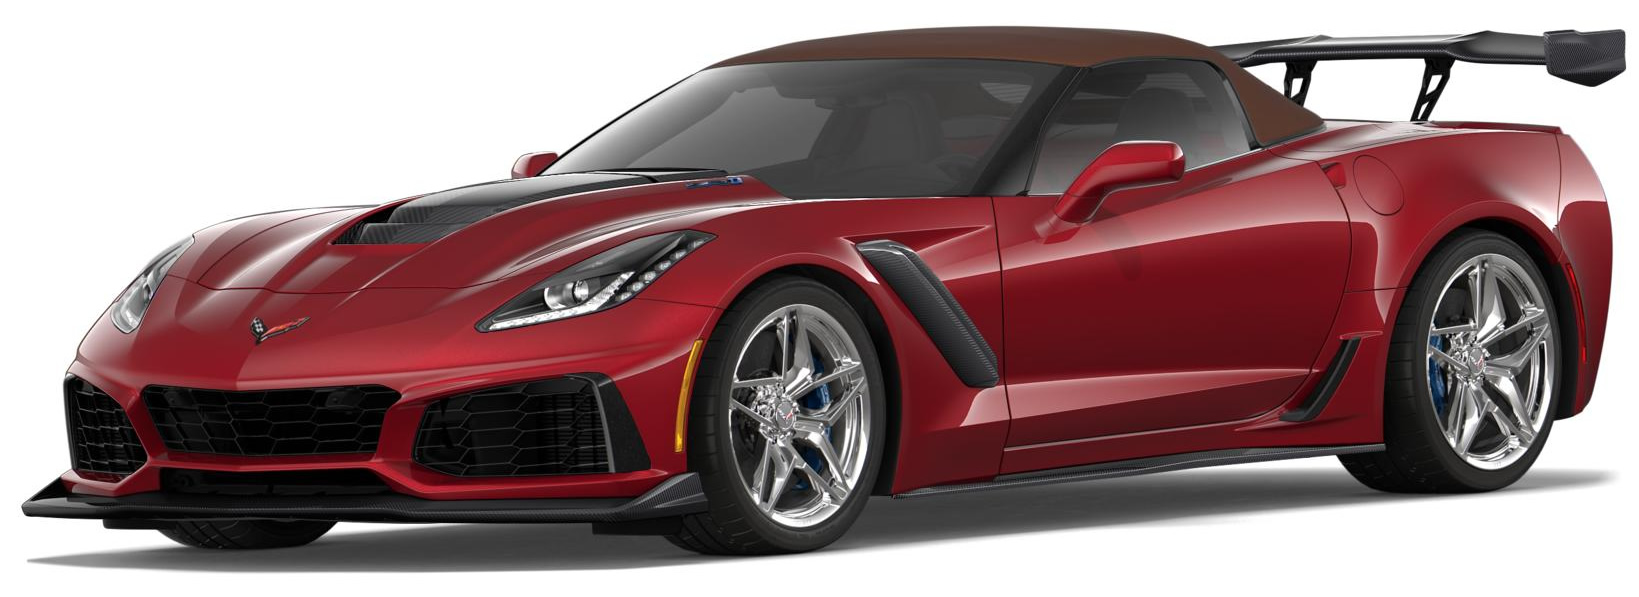 2019 Corvette ZR1 Convertible in Long Beach Red Metallic with Kalahari top, ZTK Track Performance Package and Chrome wheels.